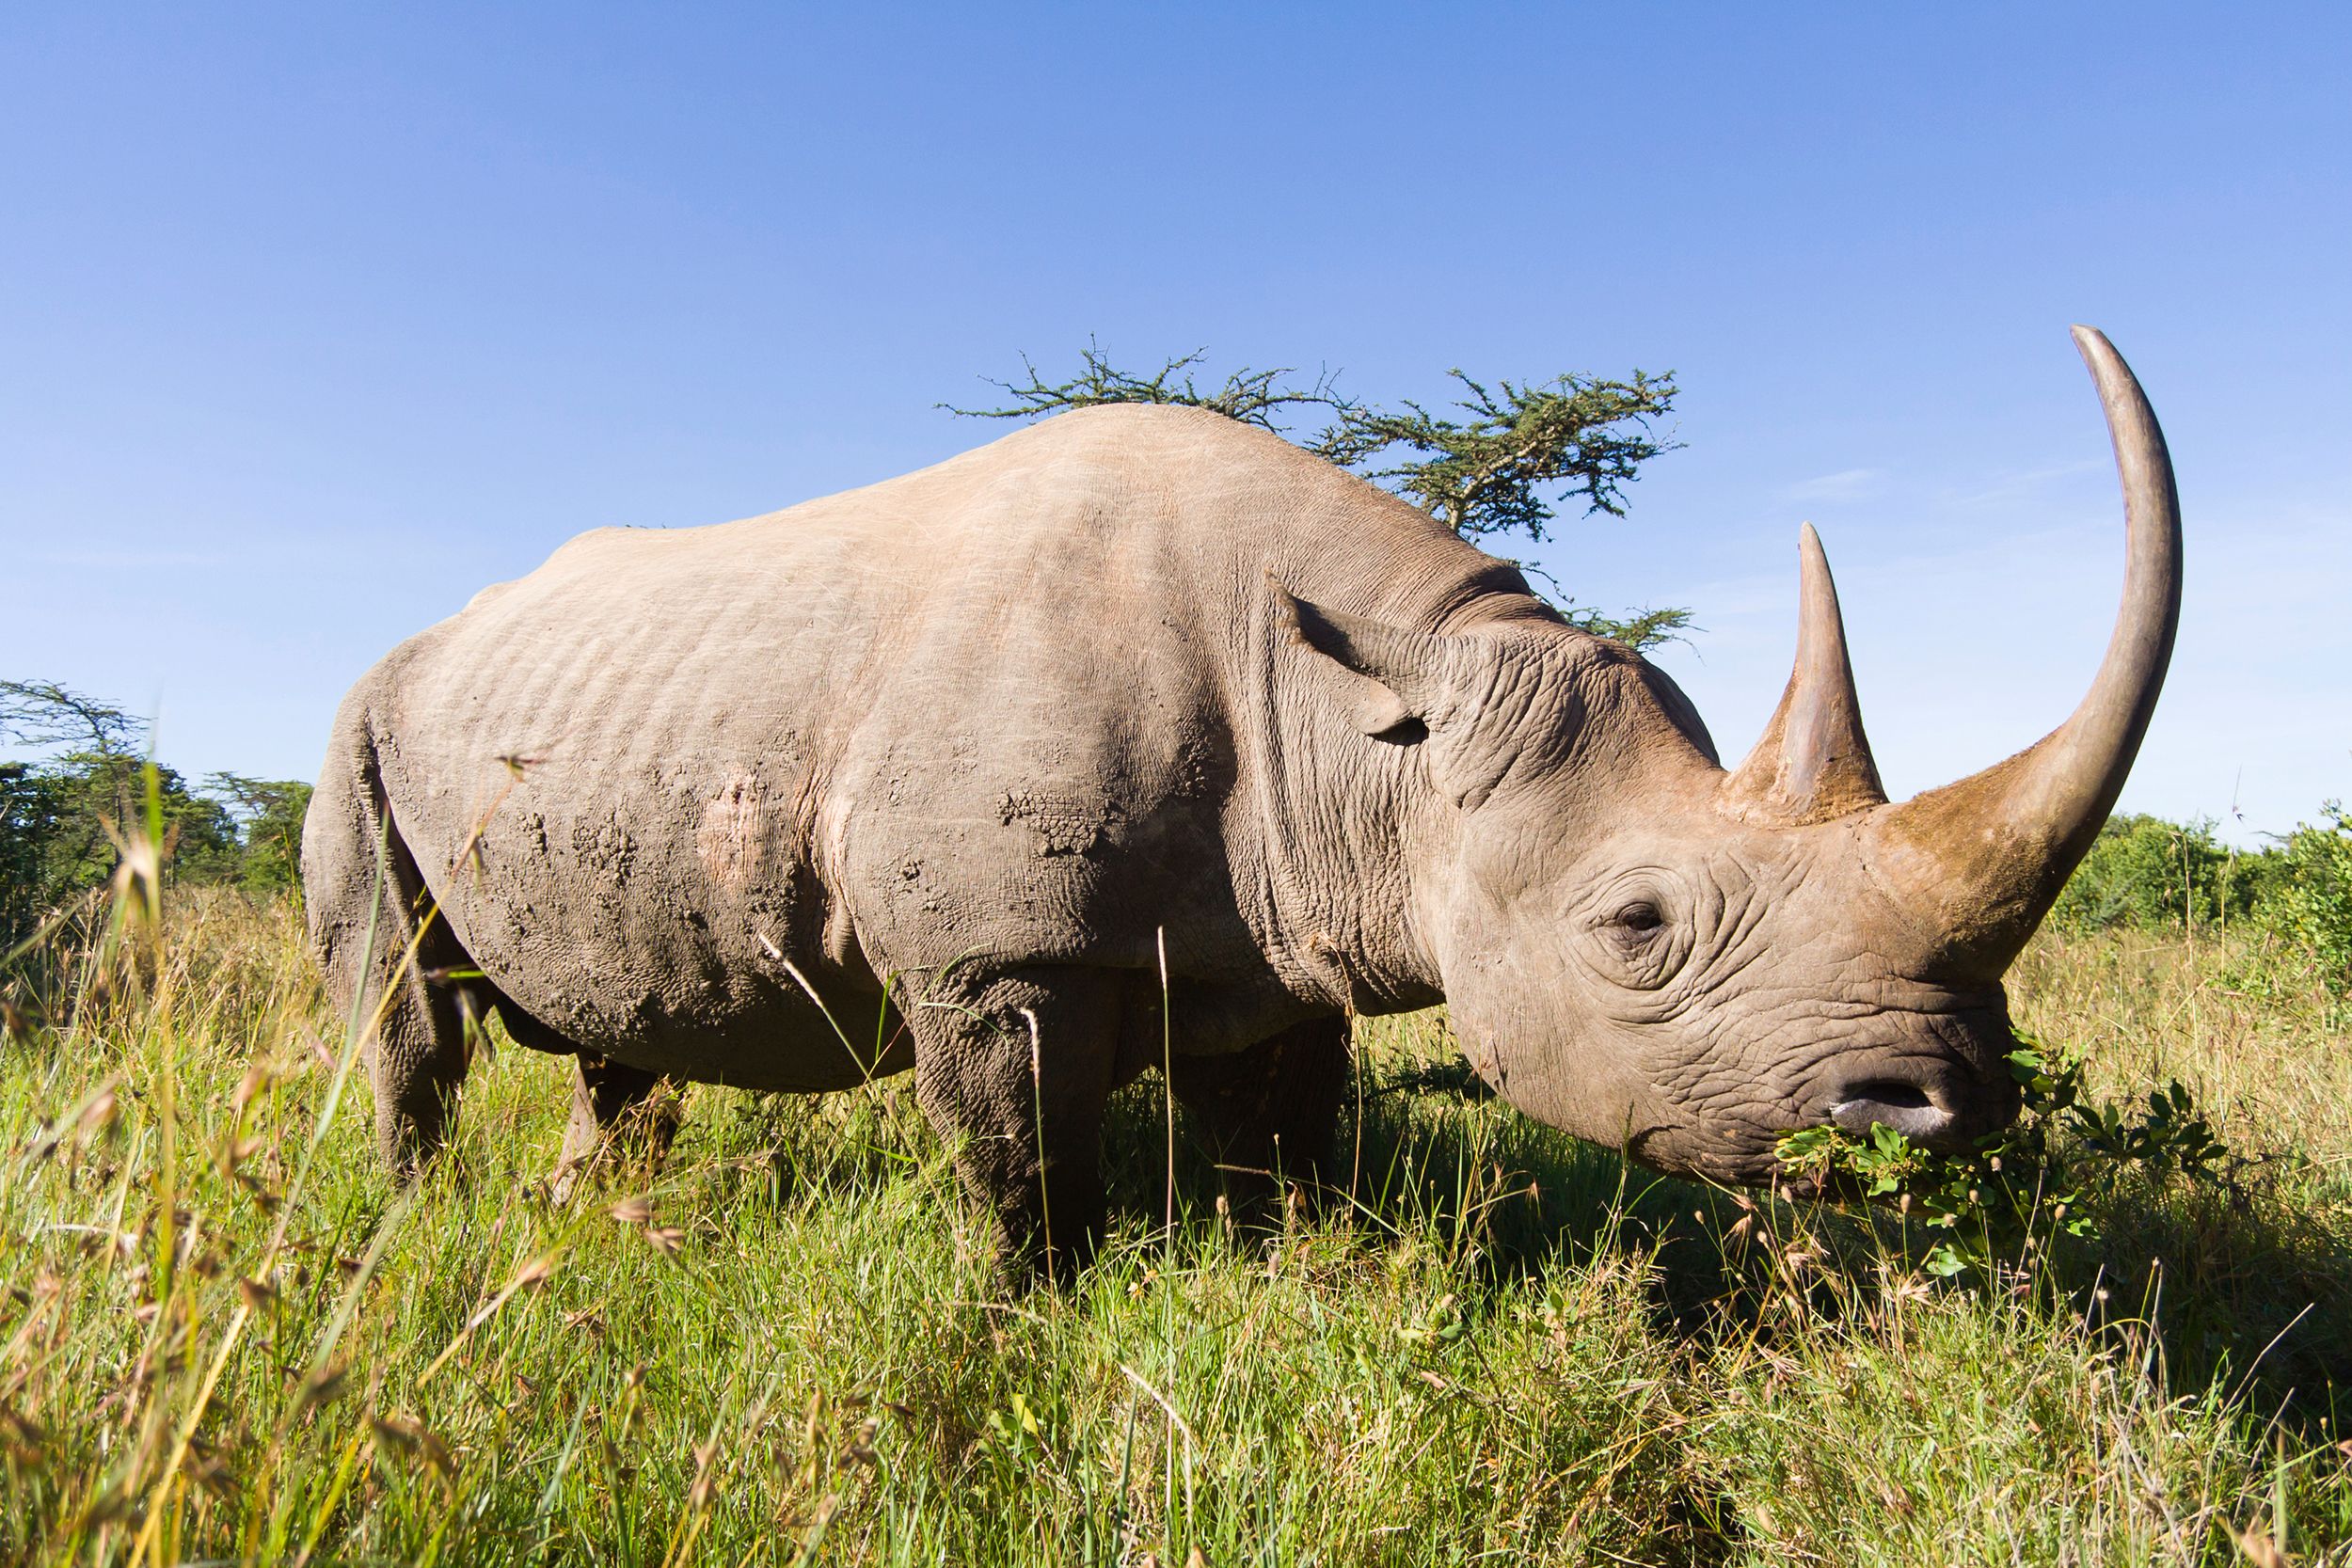 Rubbing shoulders with the rich to protect rhinos